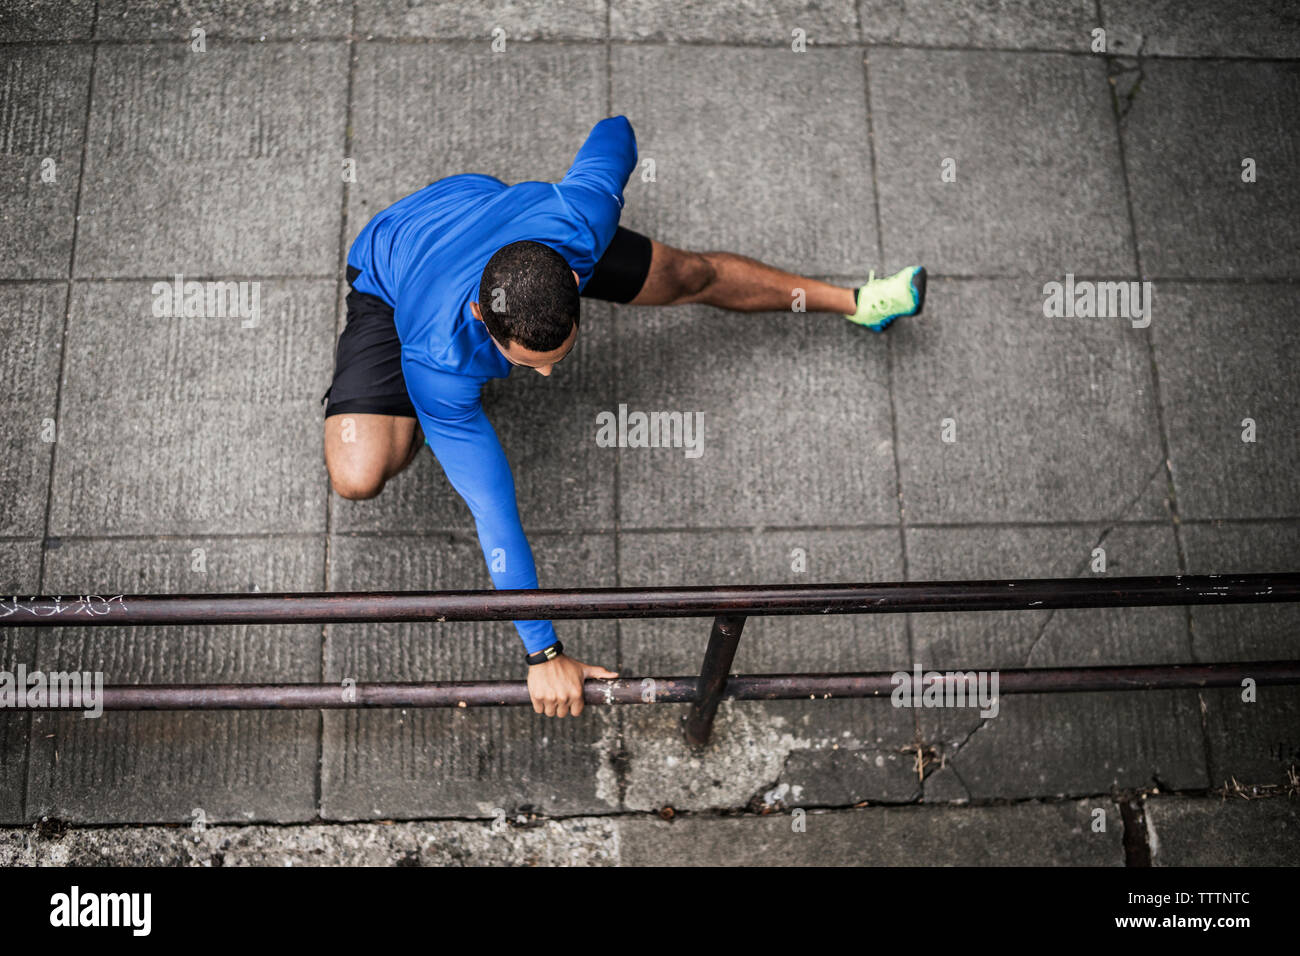 High angle view of exercising by railing on street Stock Photo